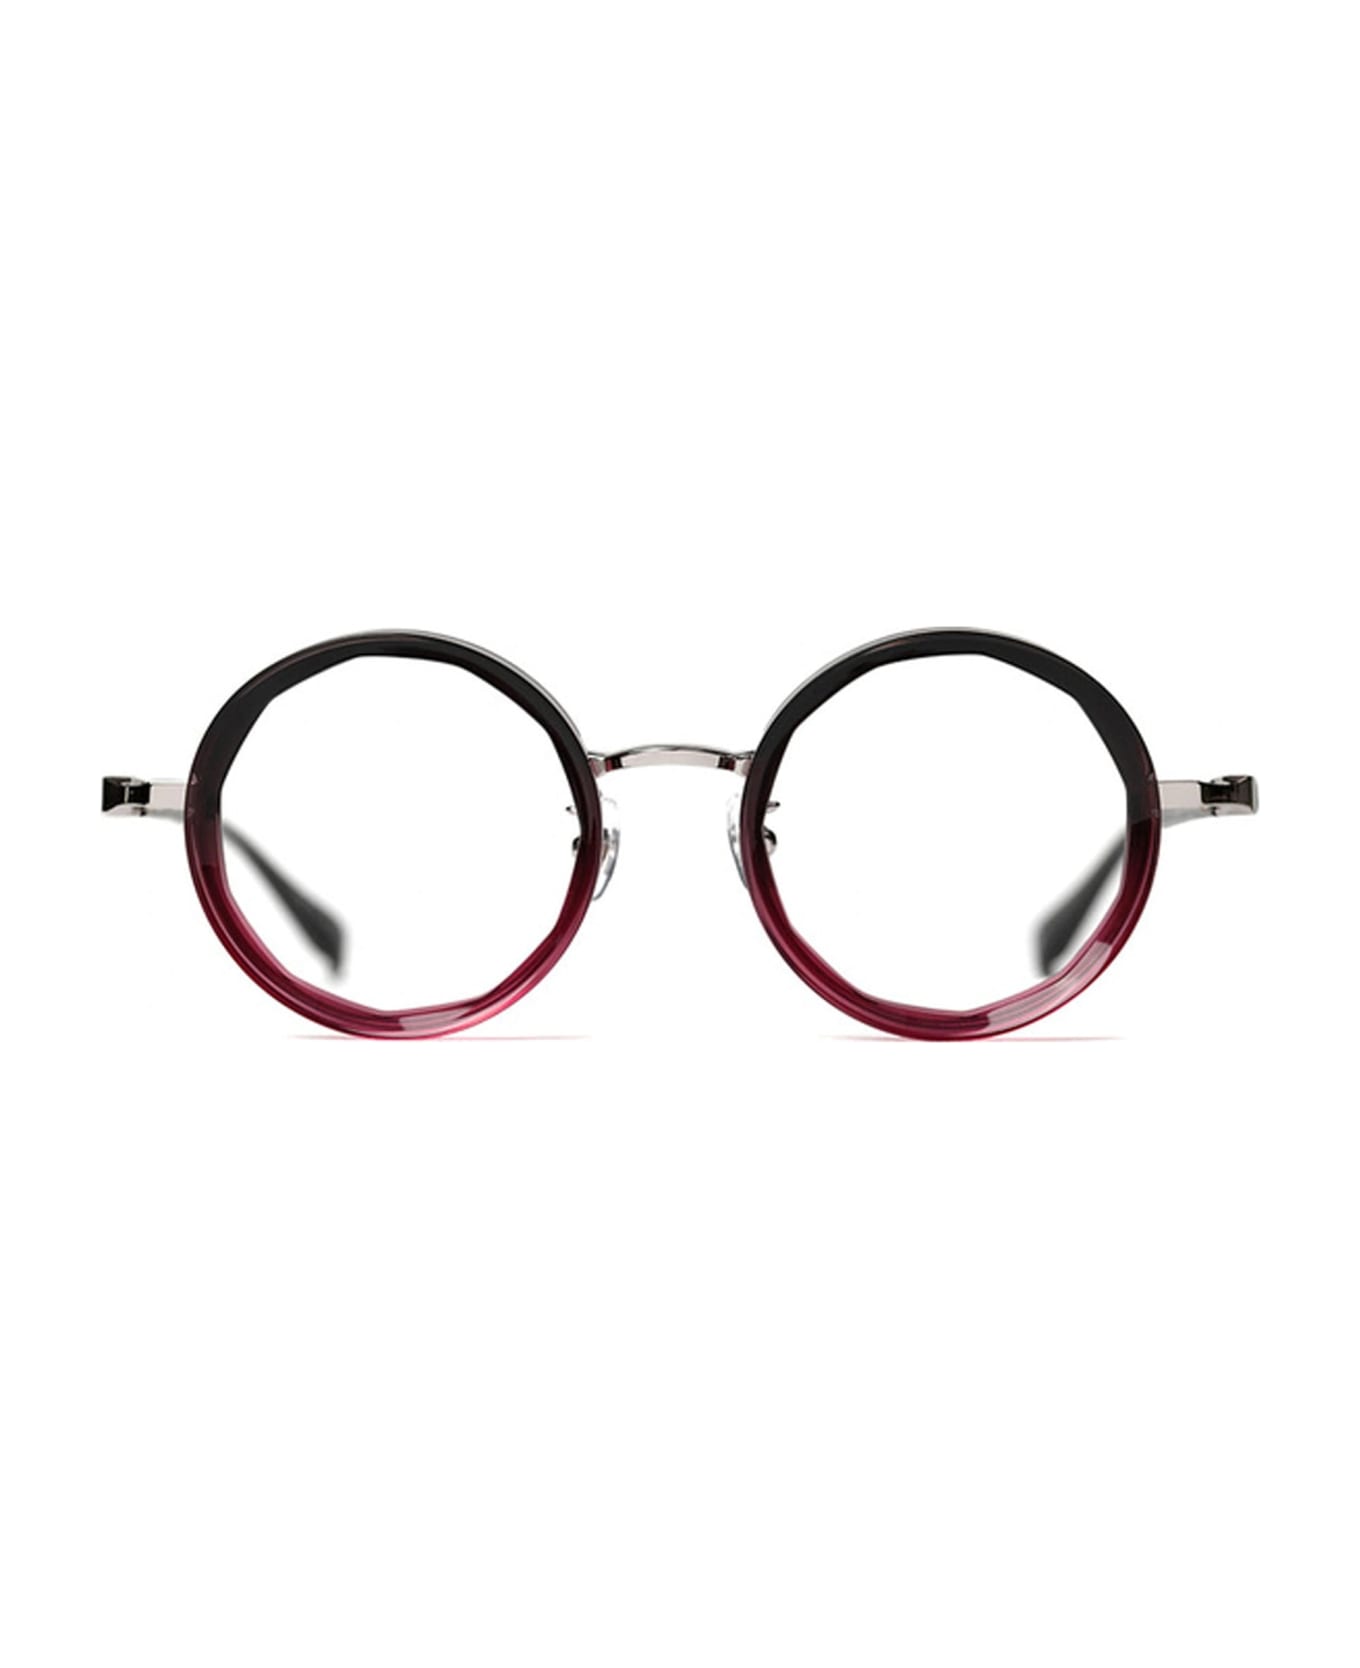 FACTORY900 Rf-058 - Gray / Red Purple Glasses - gray/red